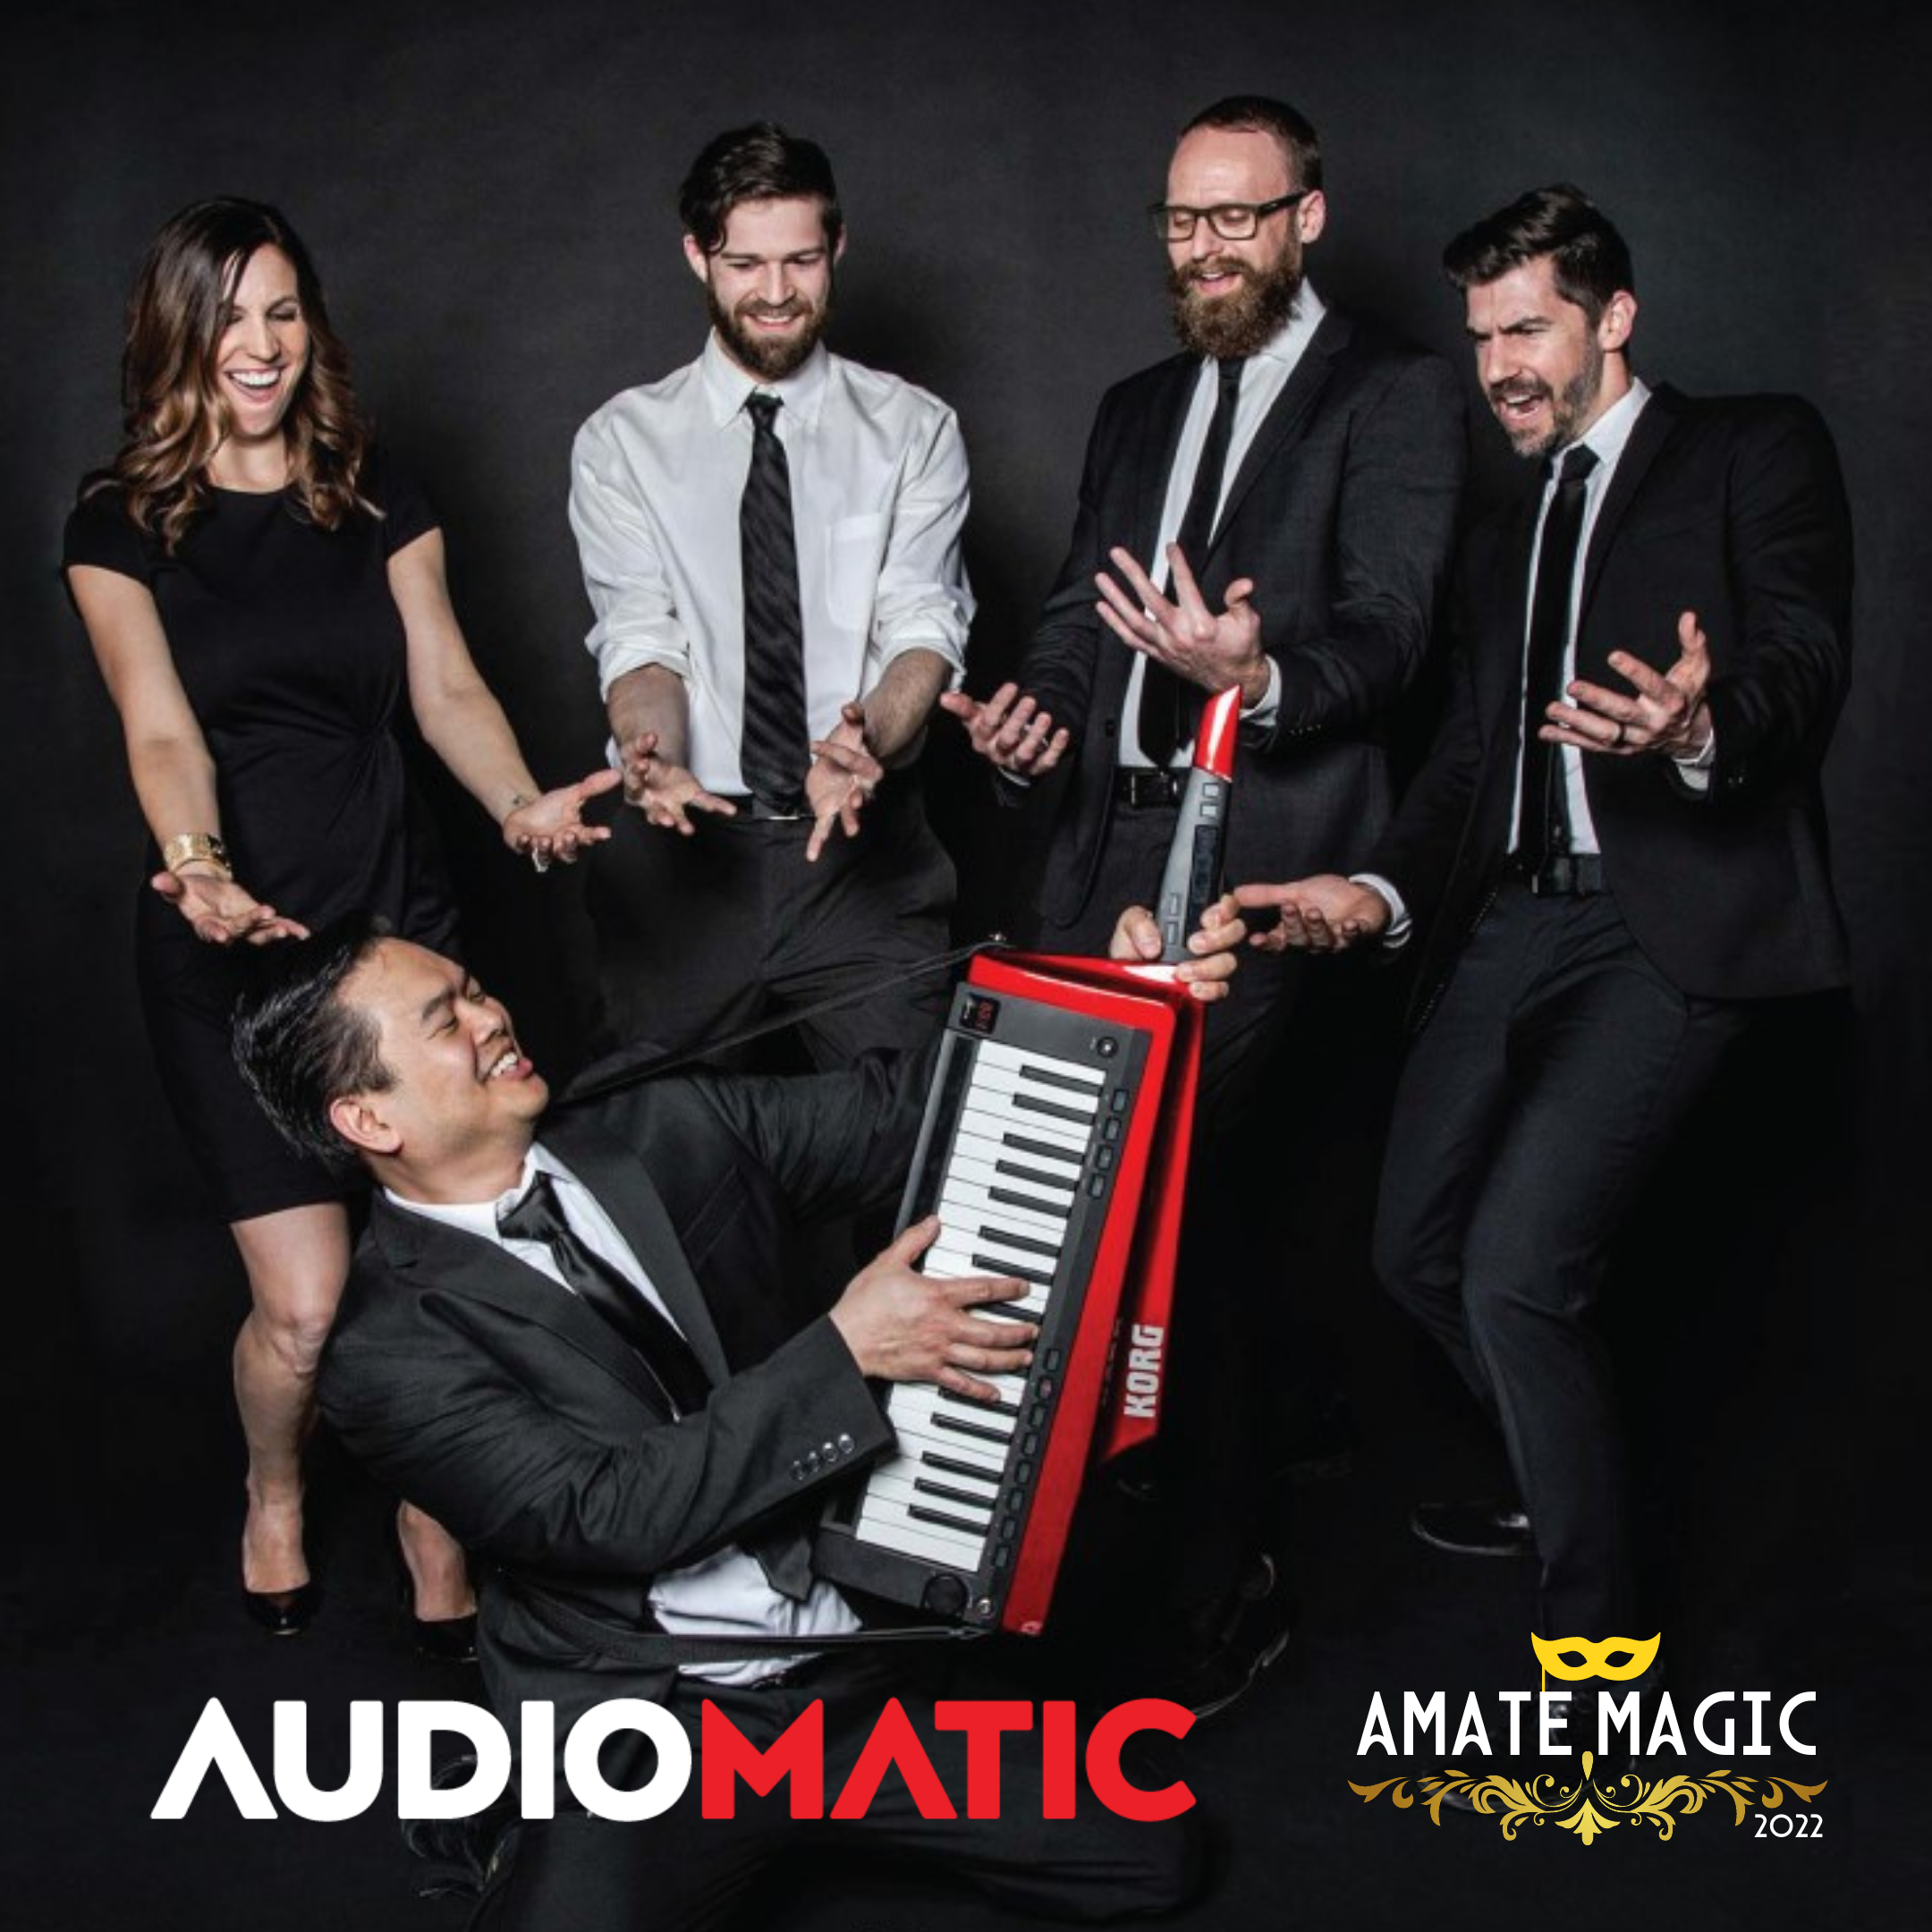 Hit the dance floor with our Magic band, Audiomatic!